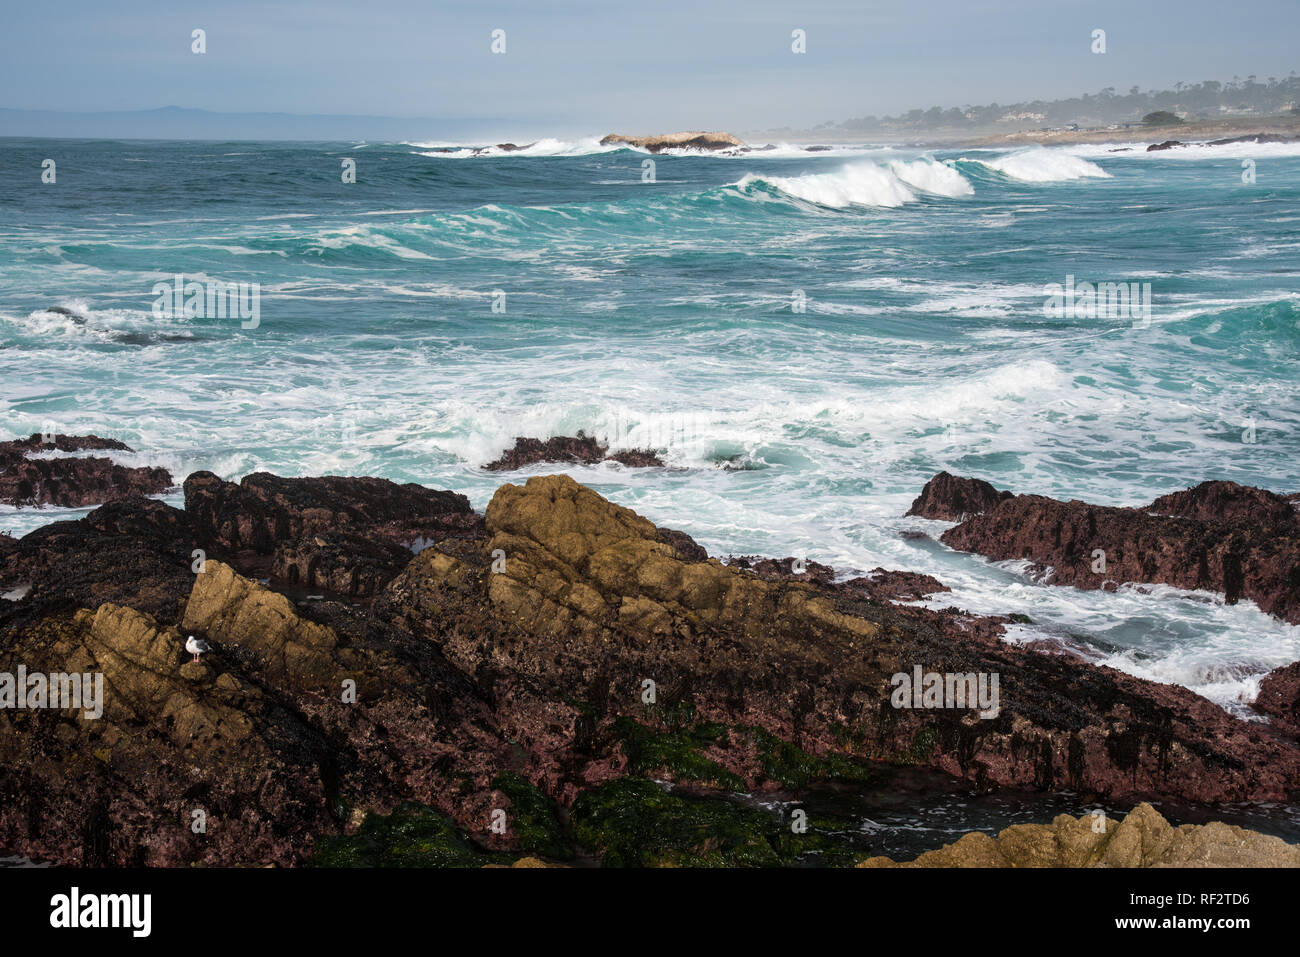 Rocky shore line, waves and beach scene on the Monterrey Peninsula.  The variation and variety of beautiful seascapes are endless. Stock Photo